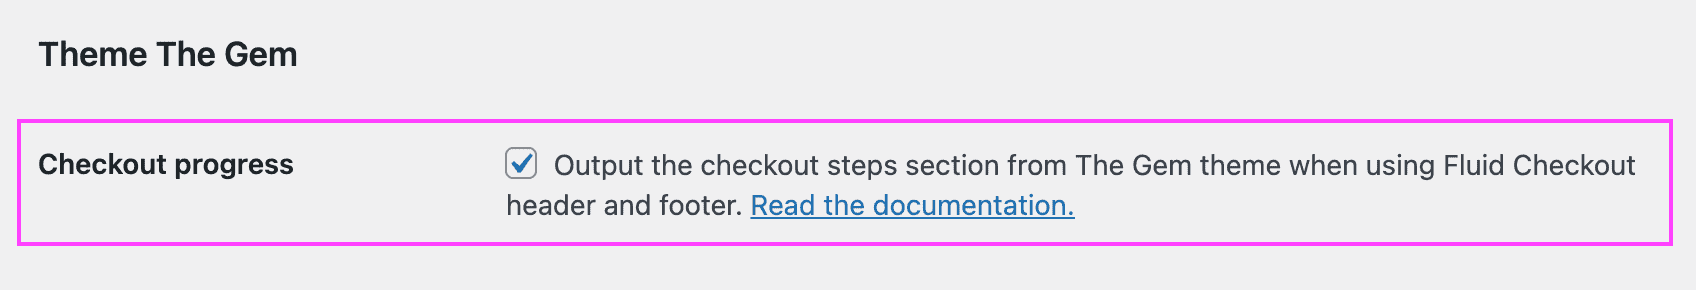 Screenshot of the checkout progress section options for Them Gem theme in the Fluid Checkout integration settings.